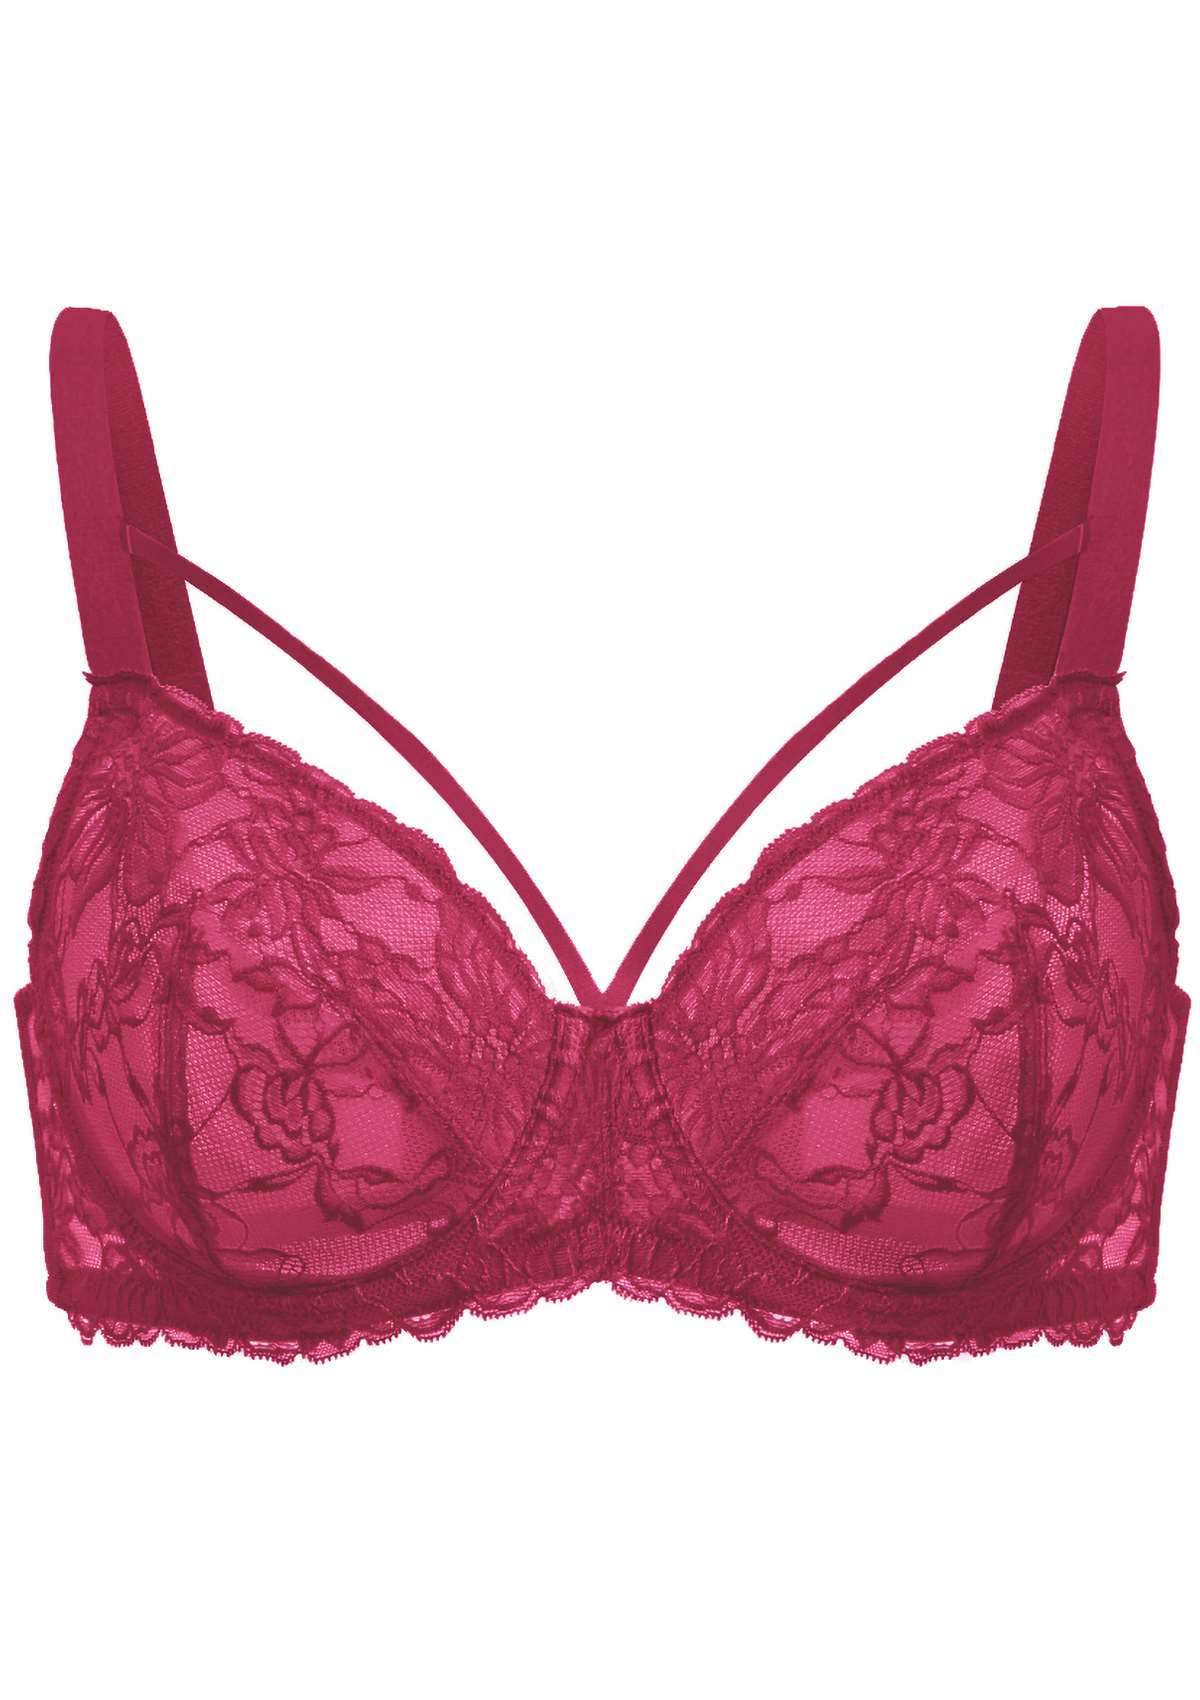 HSIA Pretty In Petals Sexy Lace Bra: Full Coverage Back Smoothing Bra - Red / 44 / DD/E